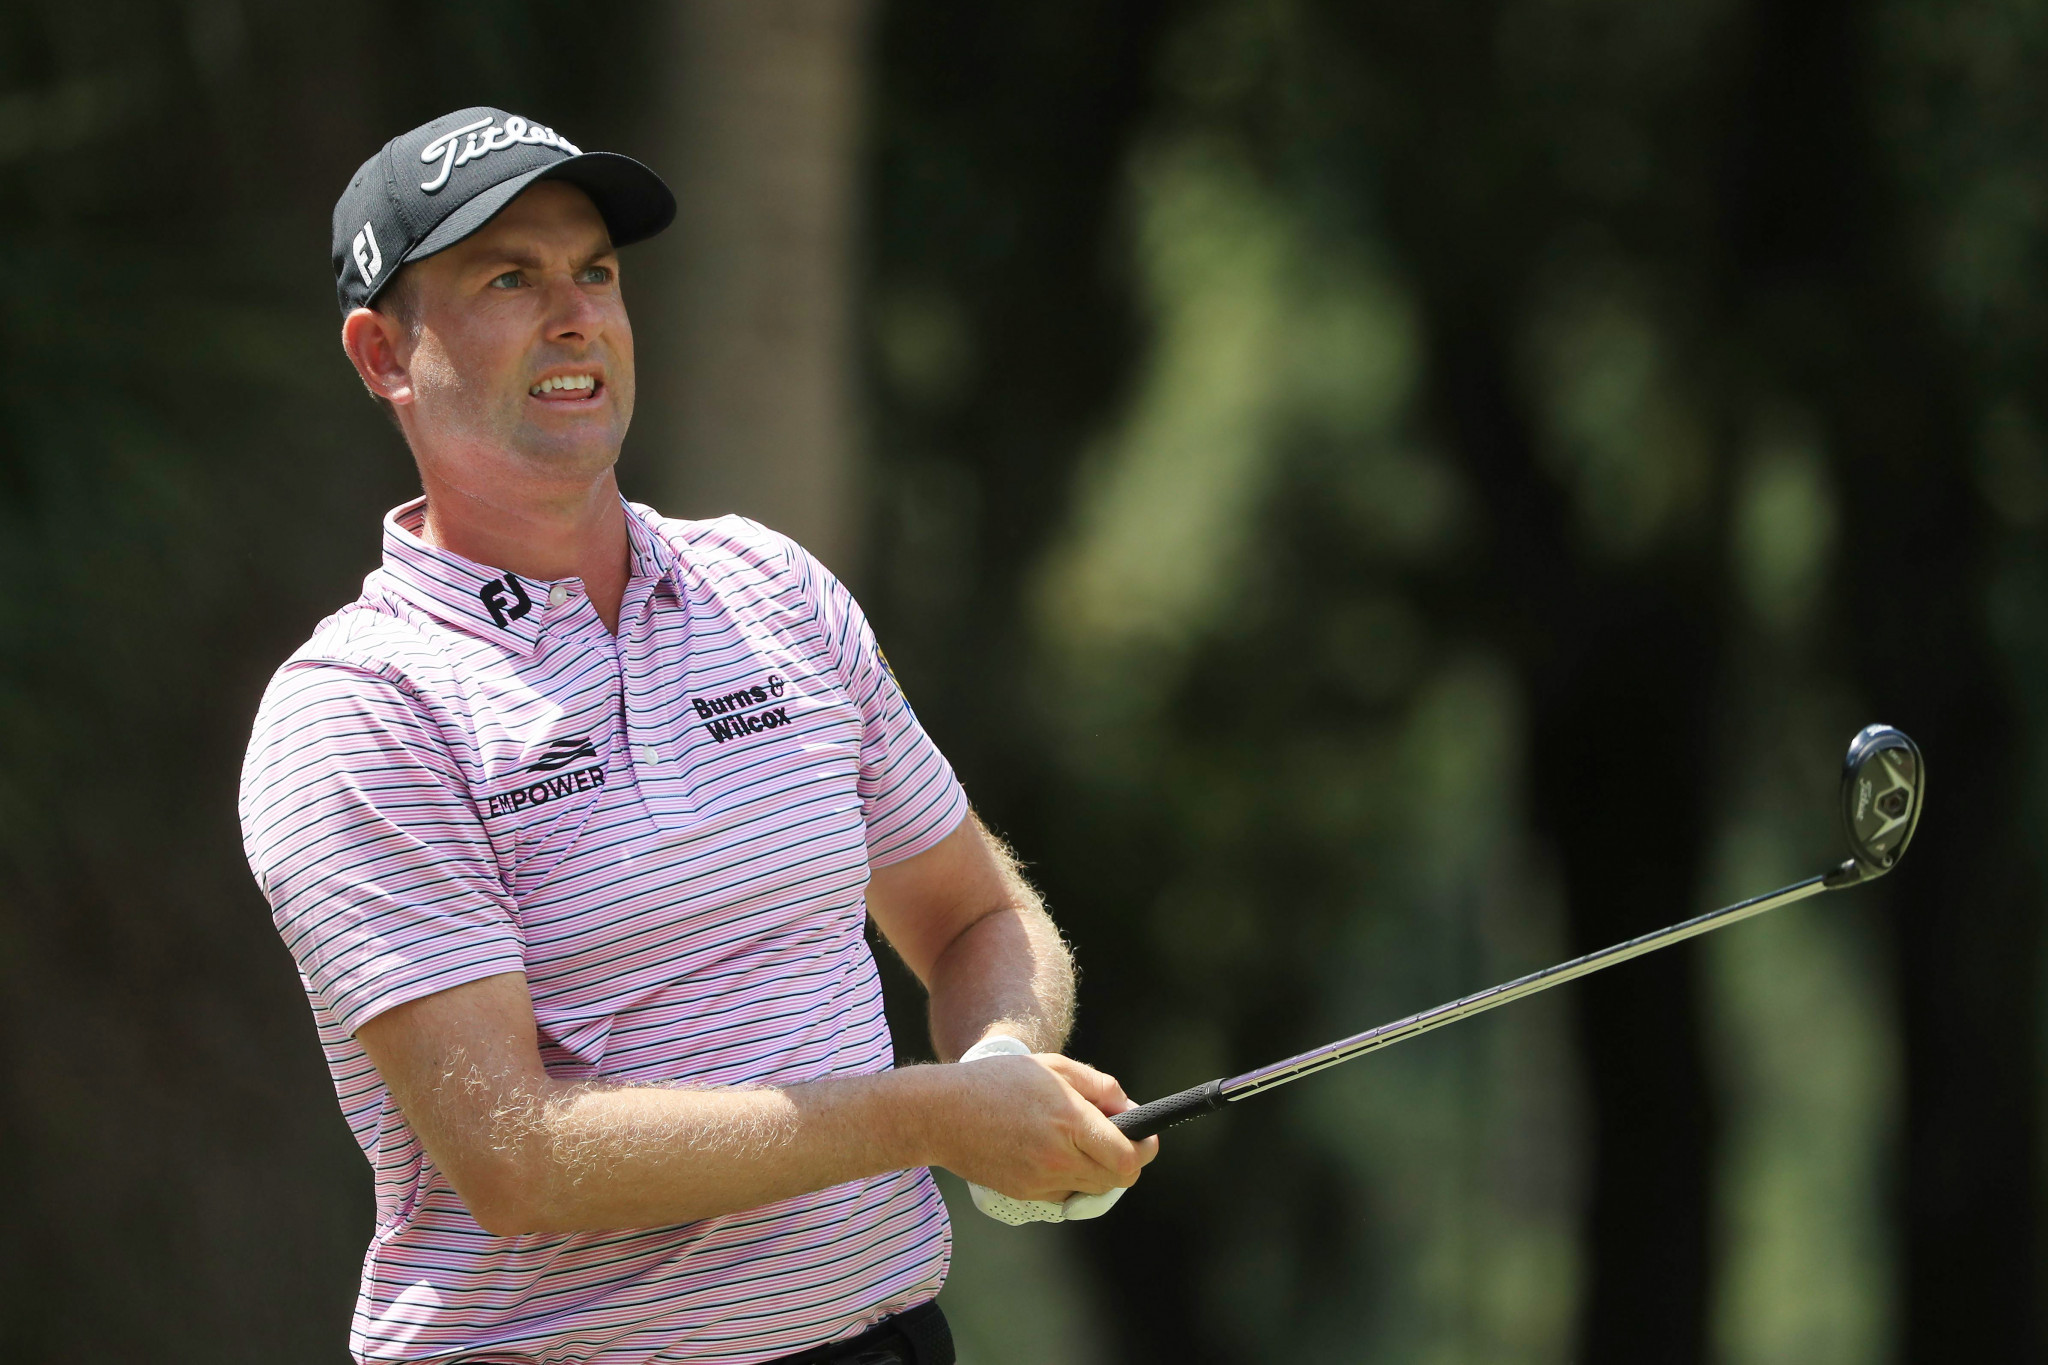 Webb Simpson leads the RBC Heritage after the first round ©Getty Images